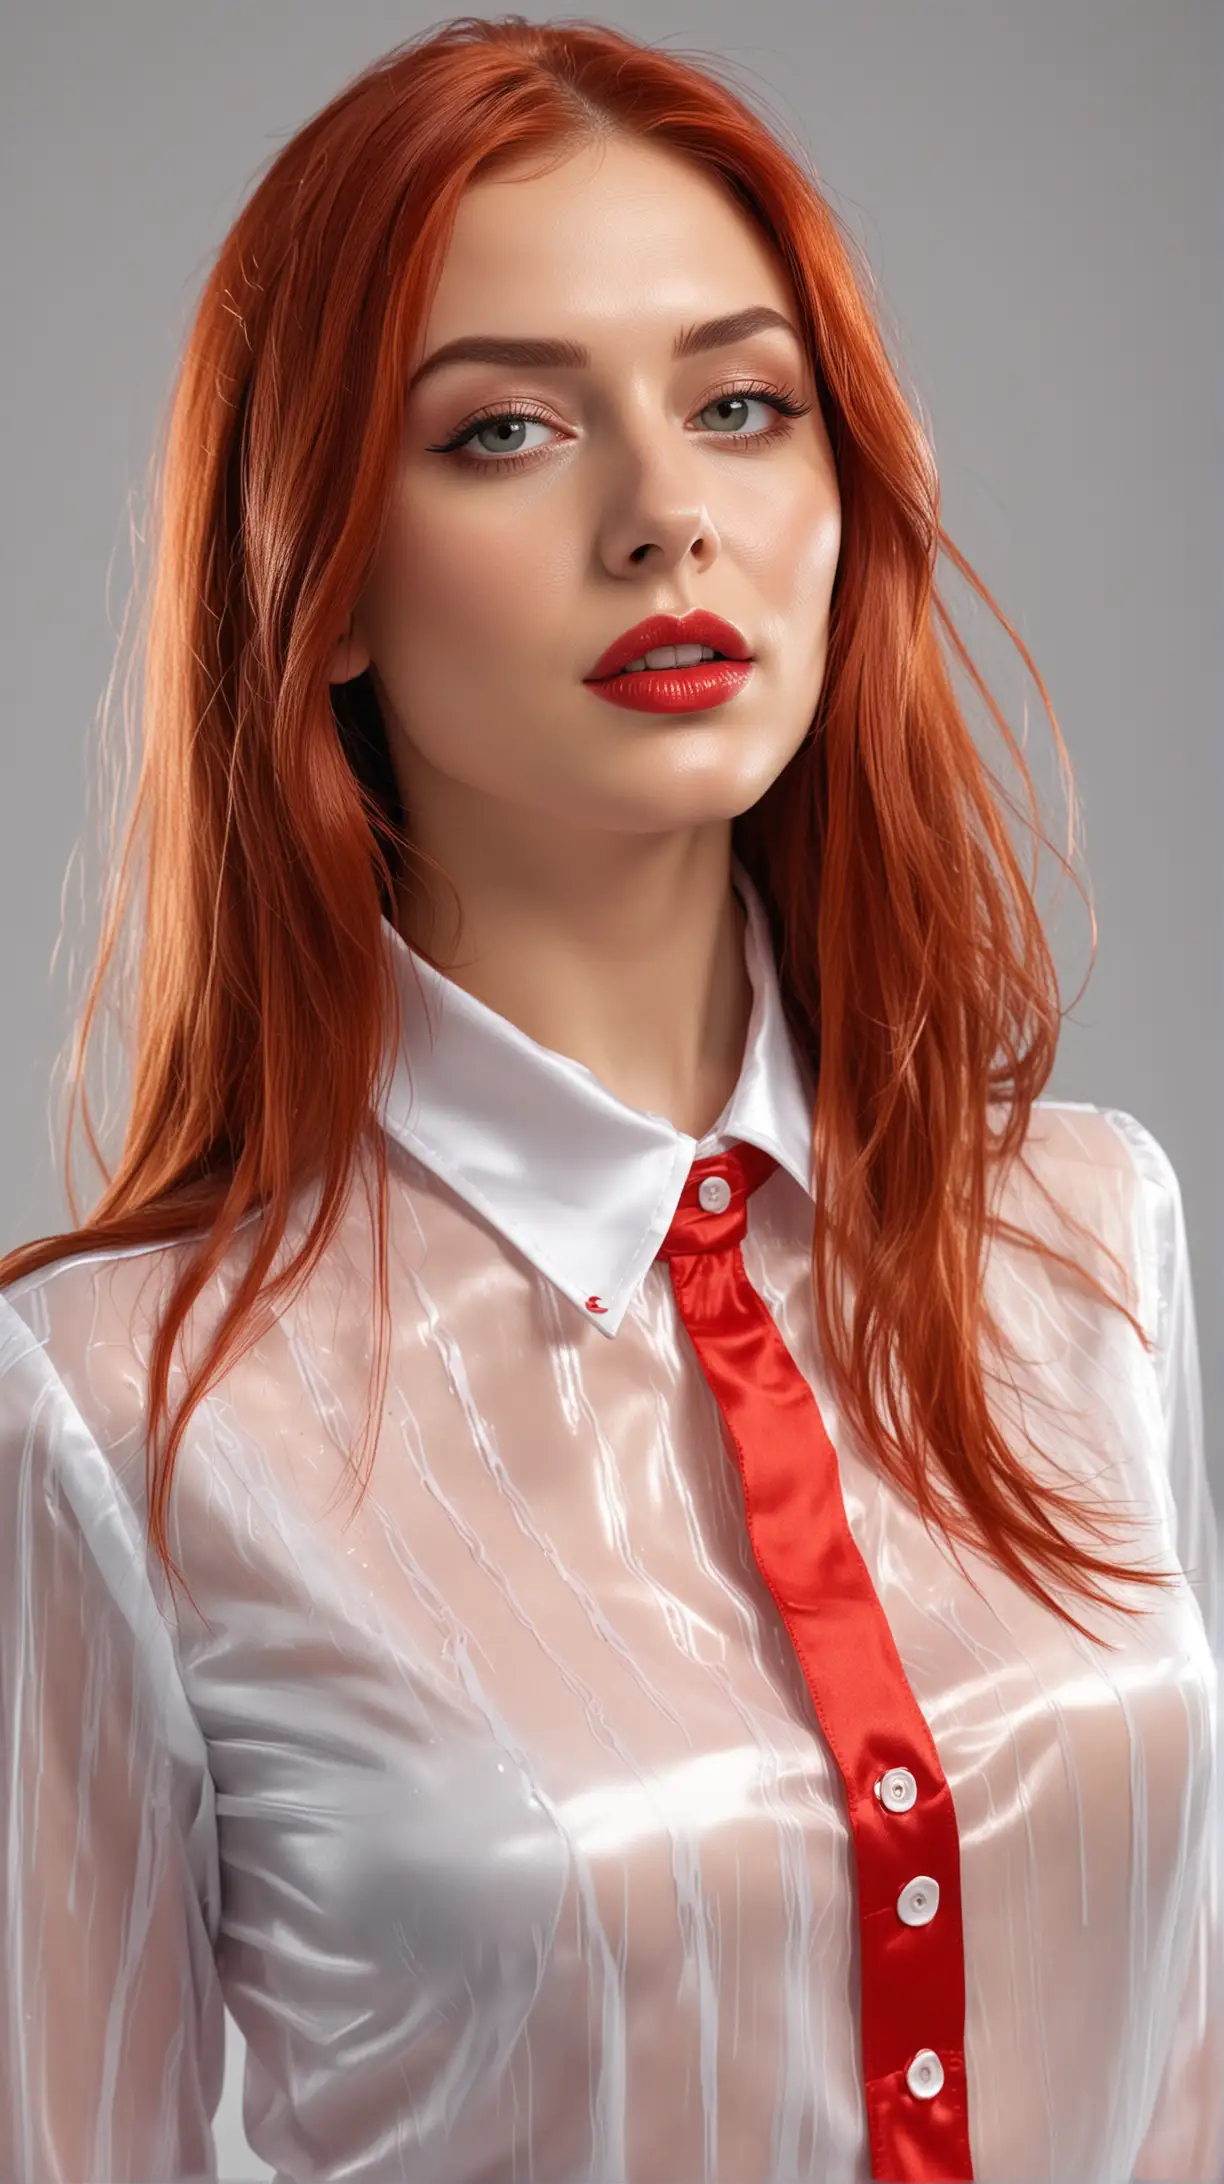 Realistyc color scene brested women in elegen secretary focus face red head long hair and red lips shinig satin blouses white transparent strippes whit a stiffened collar, great attention to additional elements such as seams, buttons, material texture covered by slime goo well-lit composition, bright background, focus on face in sensual smile slime goo on her full body pose